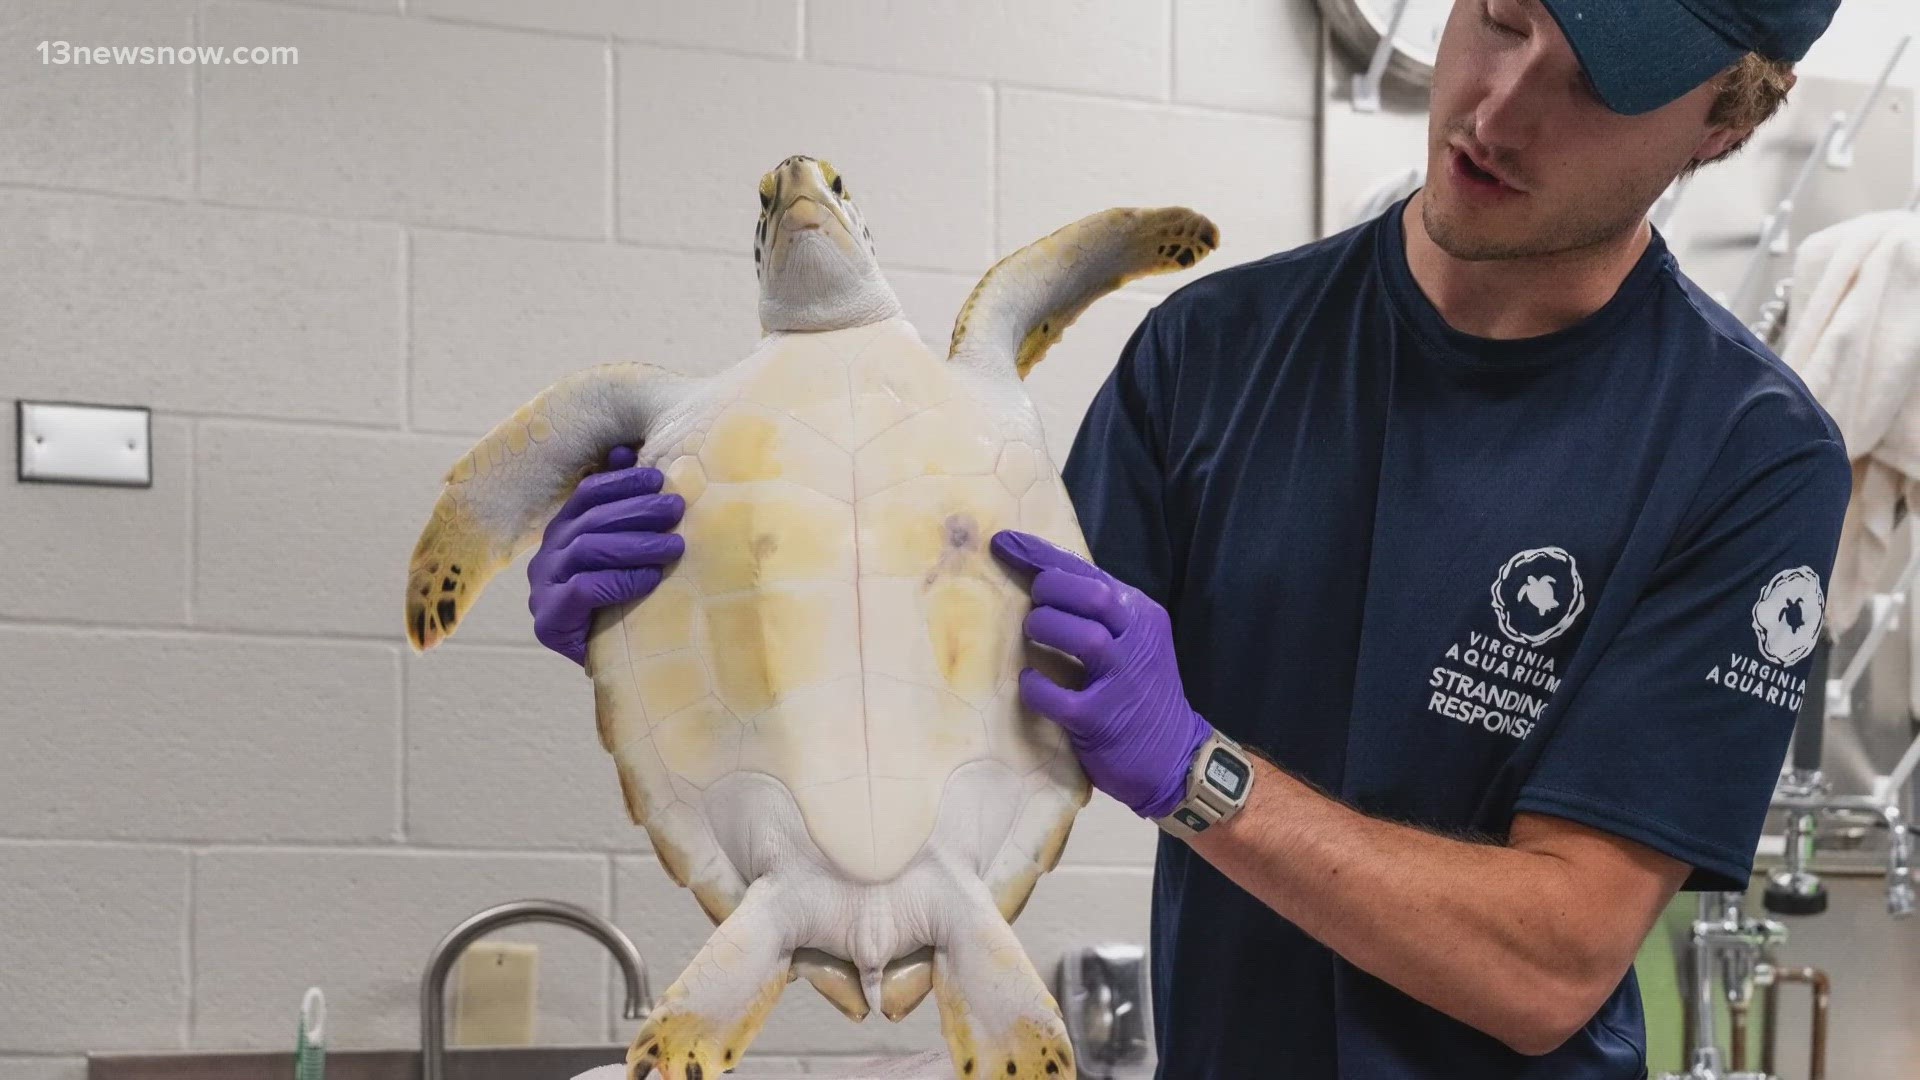 Of the 63 sea turtles reported hooked, aquarium officials said 56 were rescued and received rehabilitation.